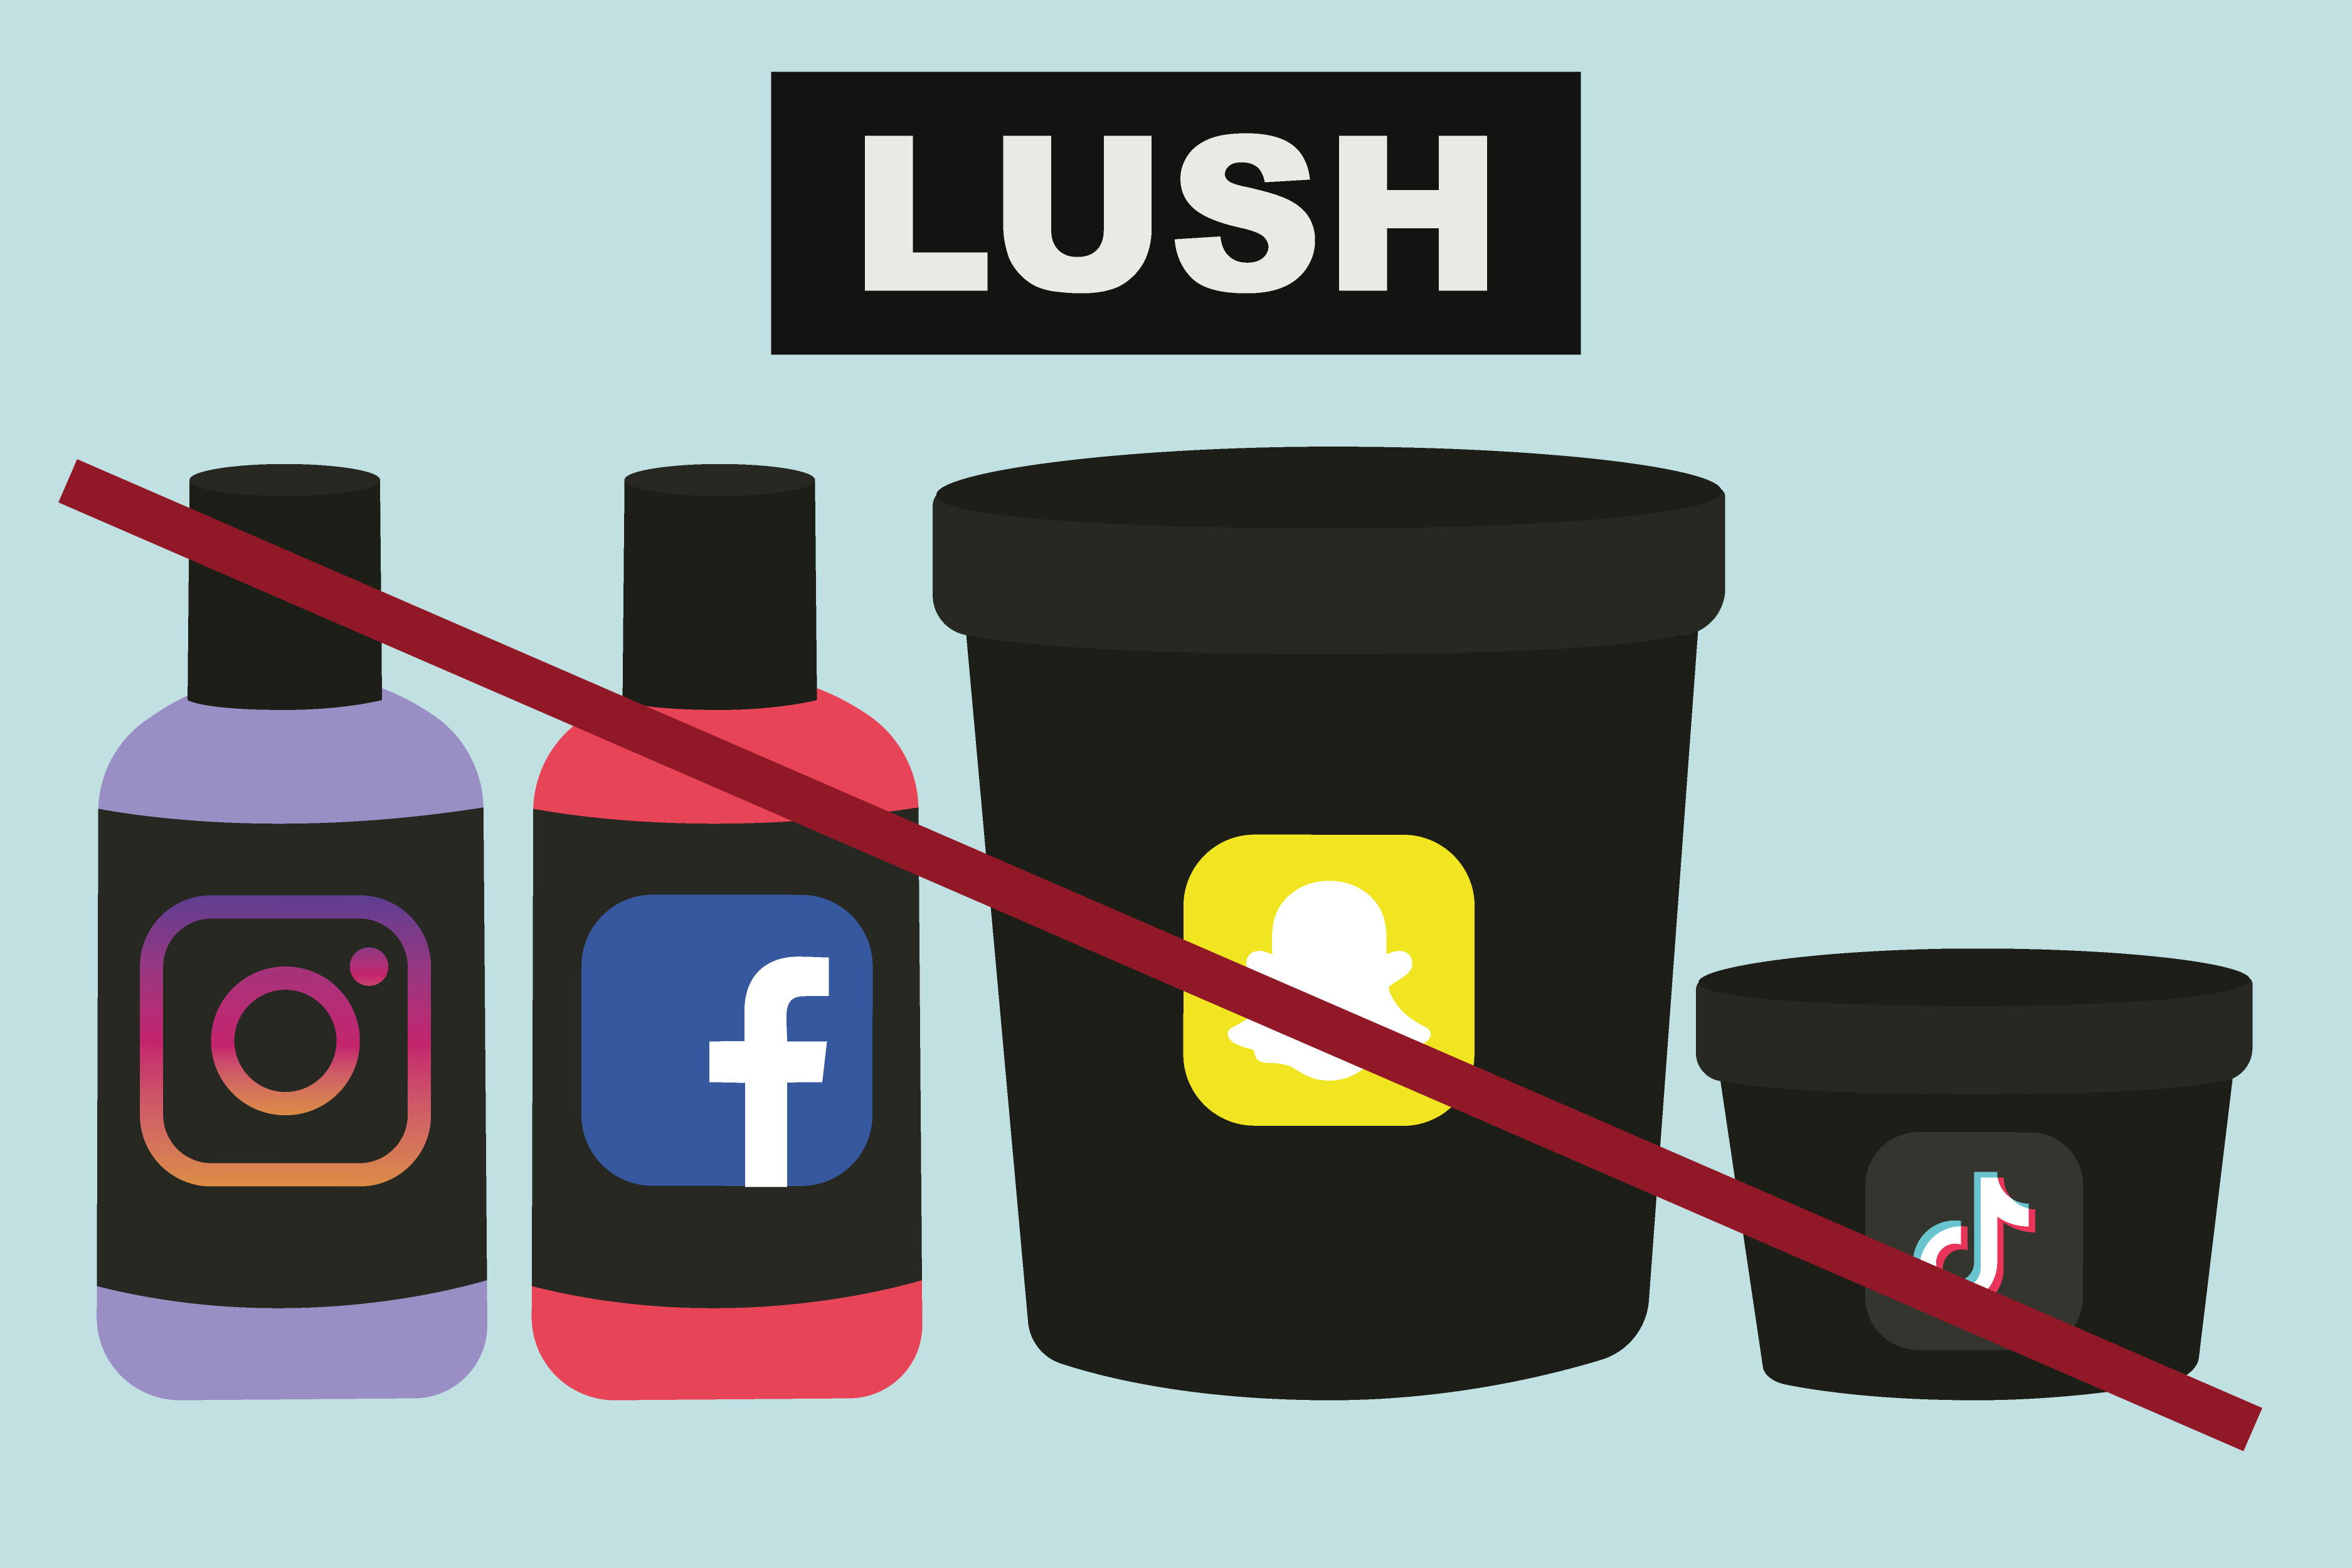 Lush is quitting social media. The start of a trend?